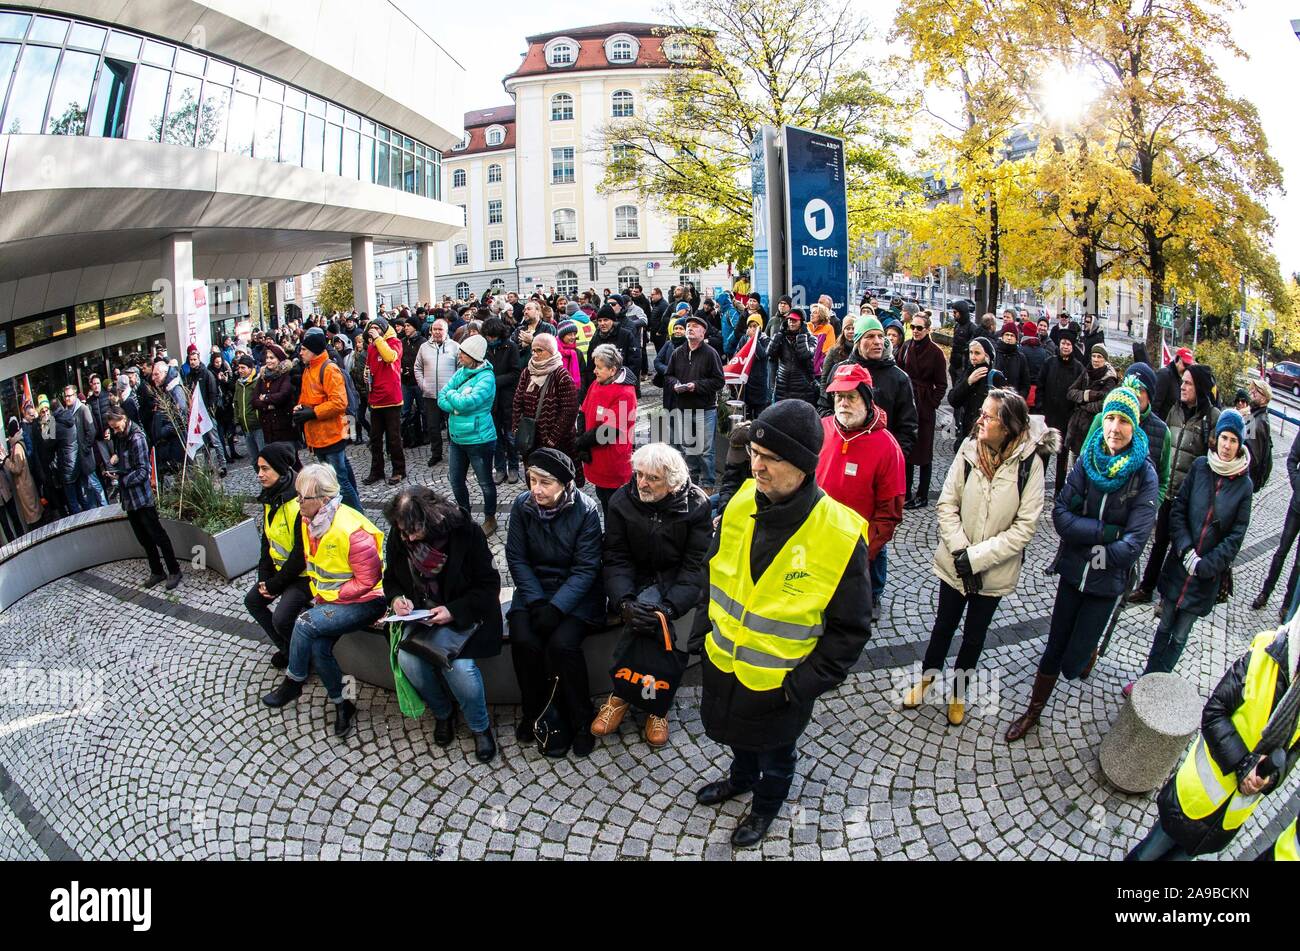 Munich, Bavaria, Germany. 14th Nov, 2019. Demanding a raise of 7, 8% over 33 months, along with increases of payments, licenses, and other payouts, the Bavarian Journalist Union (Bayerischer Journalisten Verband) called for another 48-hour strike against the Bayerischer Rundfunk media house in Munich. The strike encompasses journalists, redaction/editorial staff, and those in related roles with at least 350 in attendance at the Munich location. Credit: ZUMA Press, Inc./Alamy Live News Stock Photo